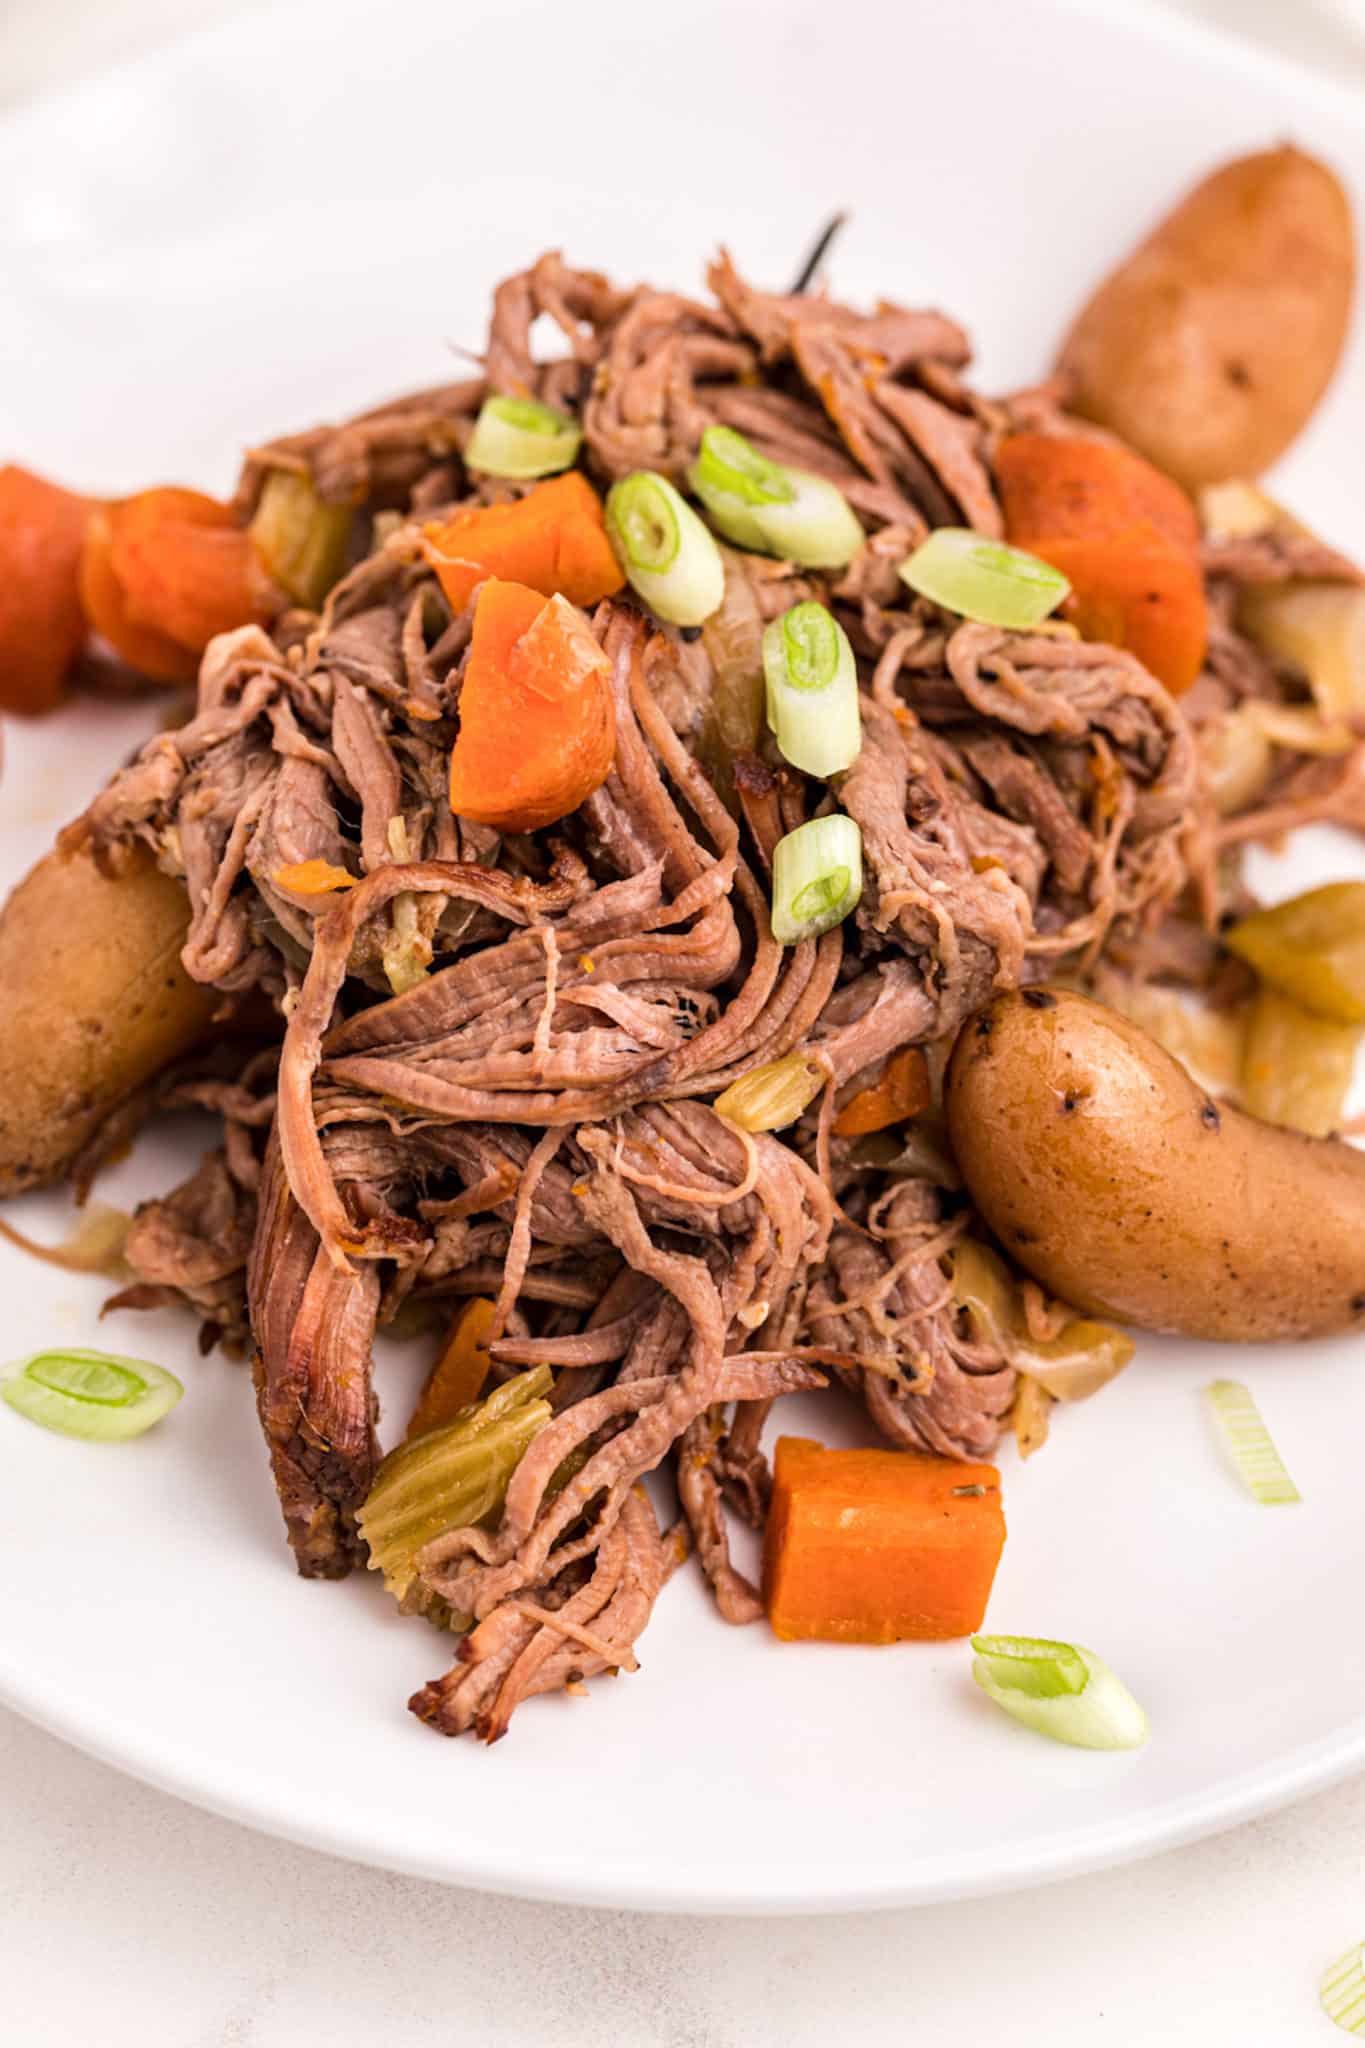 shredded beef with vegetables served on a plate.